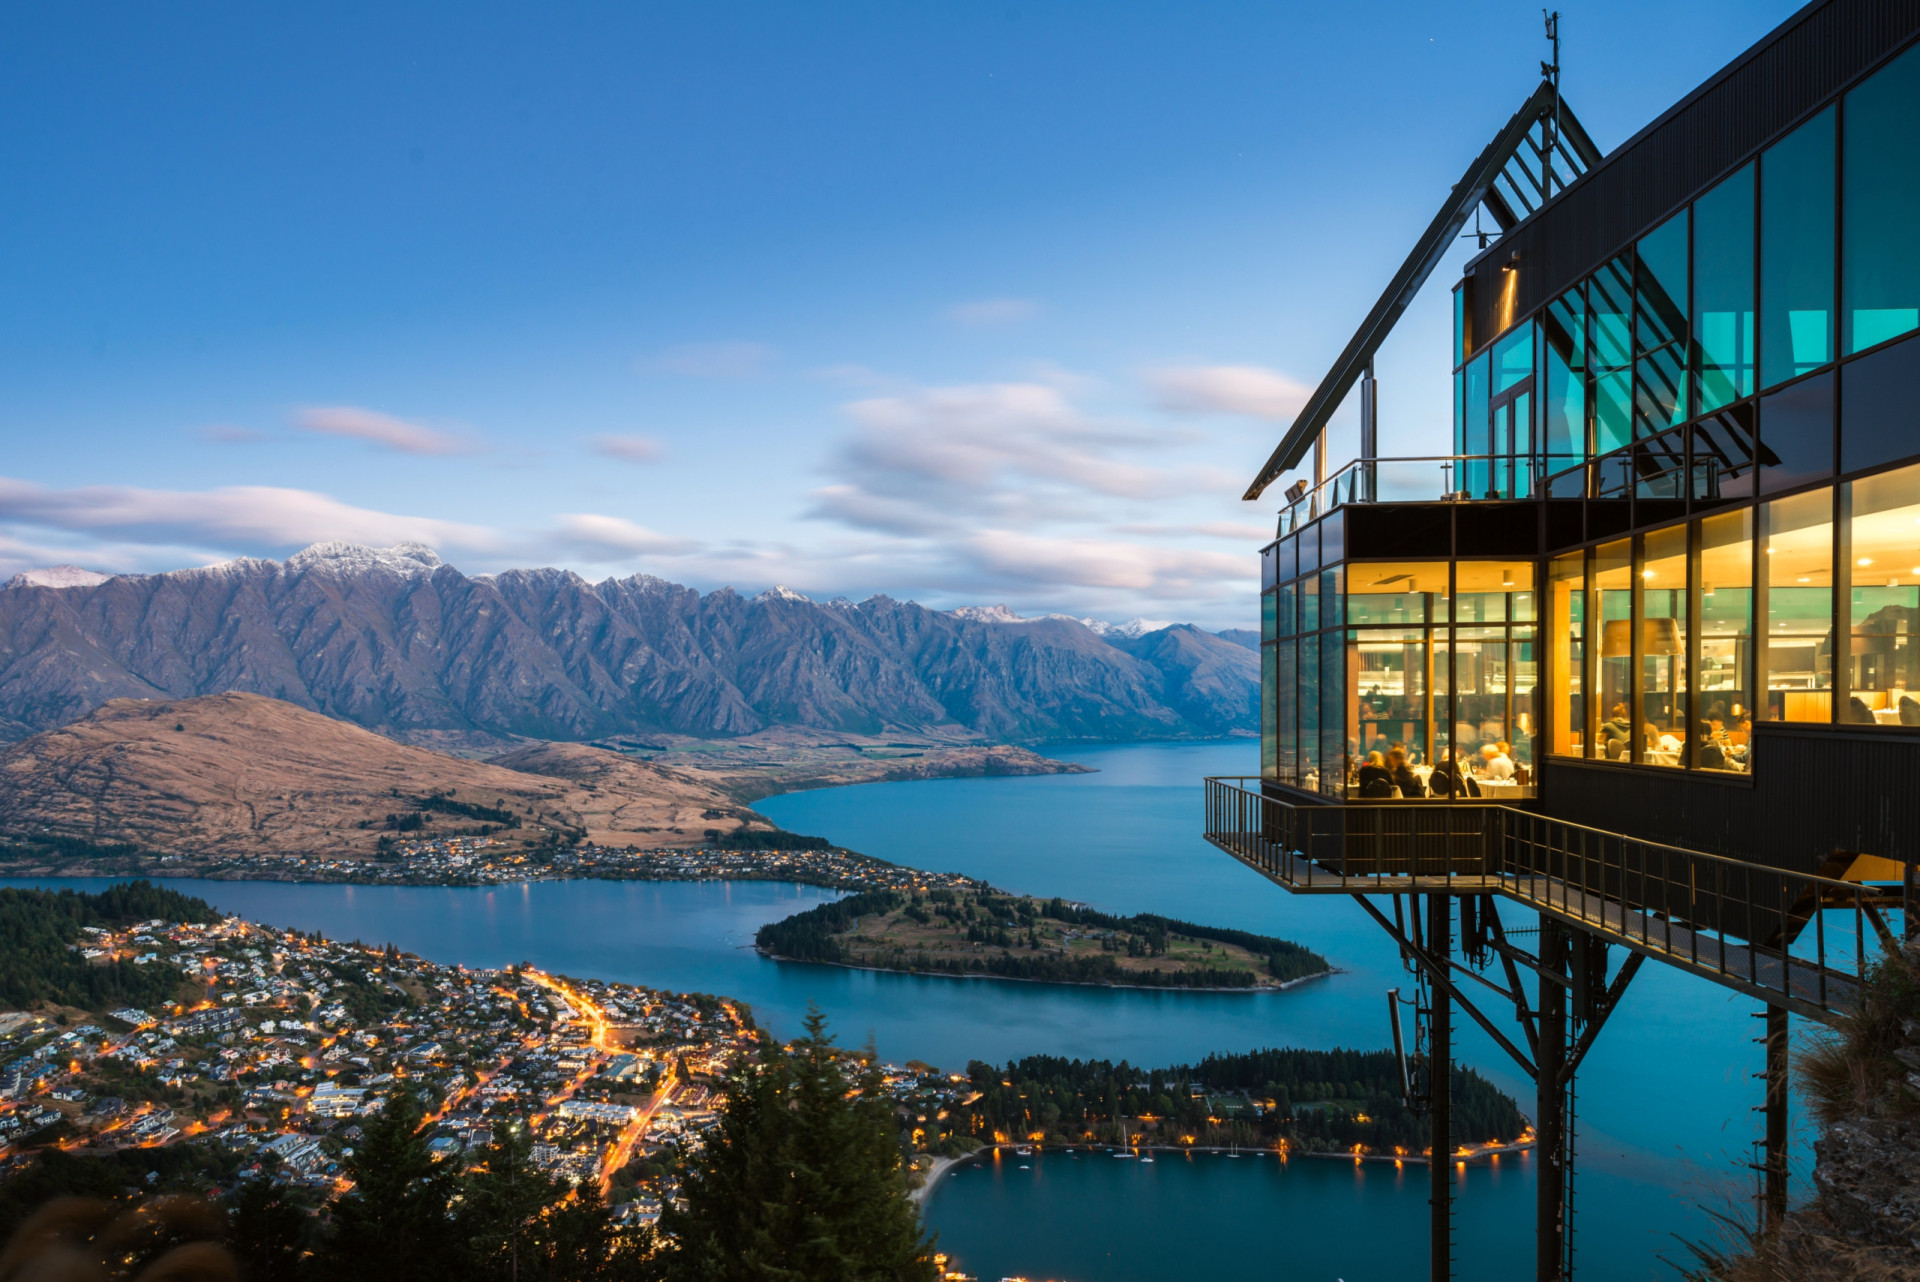 <p>New Zealand, it seems, is on everybody's lips. This is the long-haul destination of choice for 2024, according to many travel experts. A compelling year-round destination (remember, the country's peak summer months are from December to March), New Zealand can be as wild or as luxurious as you wish, depending on what you're looking for. A good starting point is Queenstown (pictured), known for its appealing adventure and ski tourism.</p>